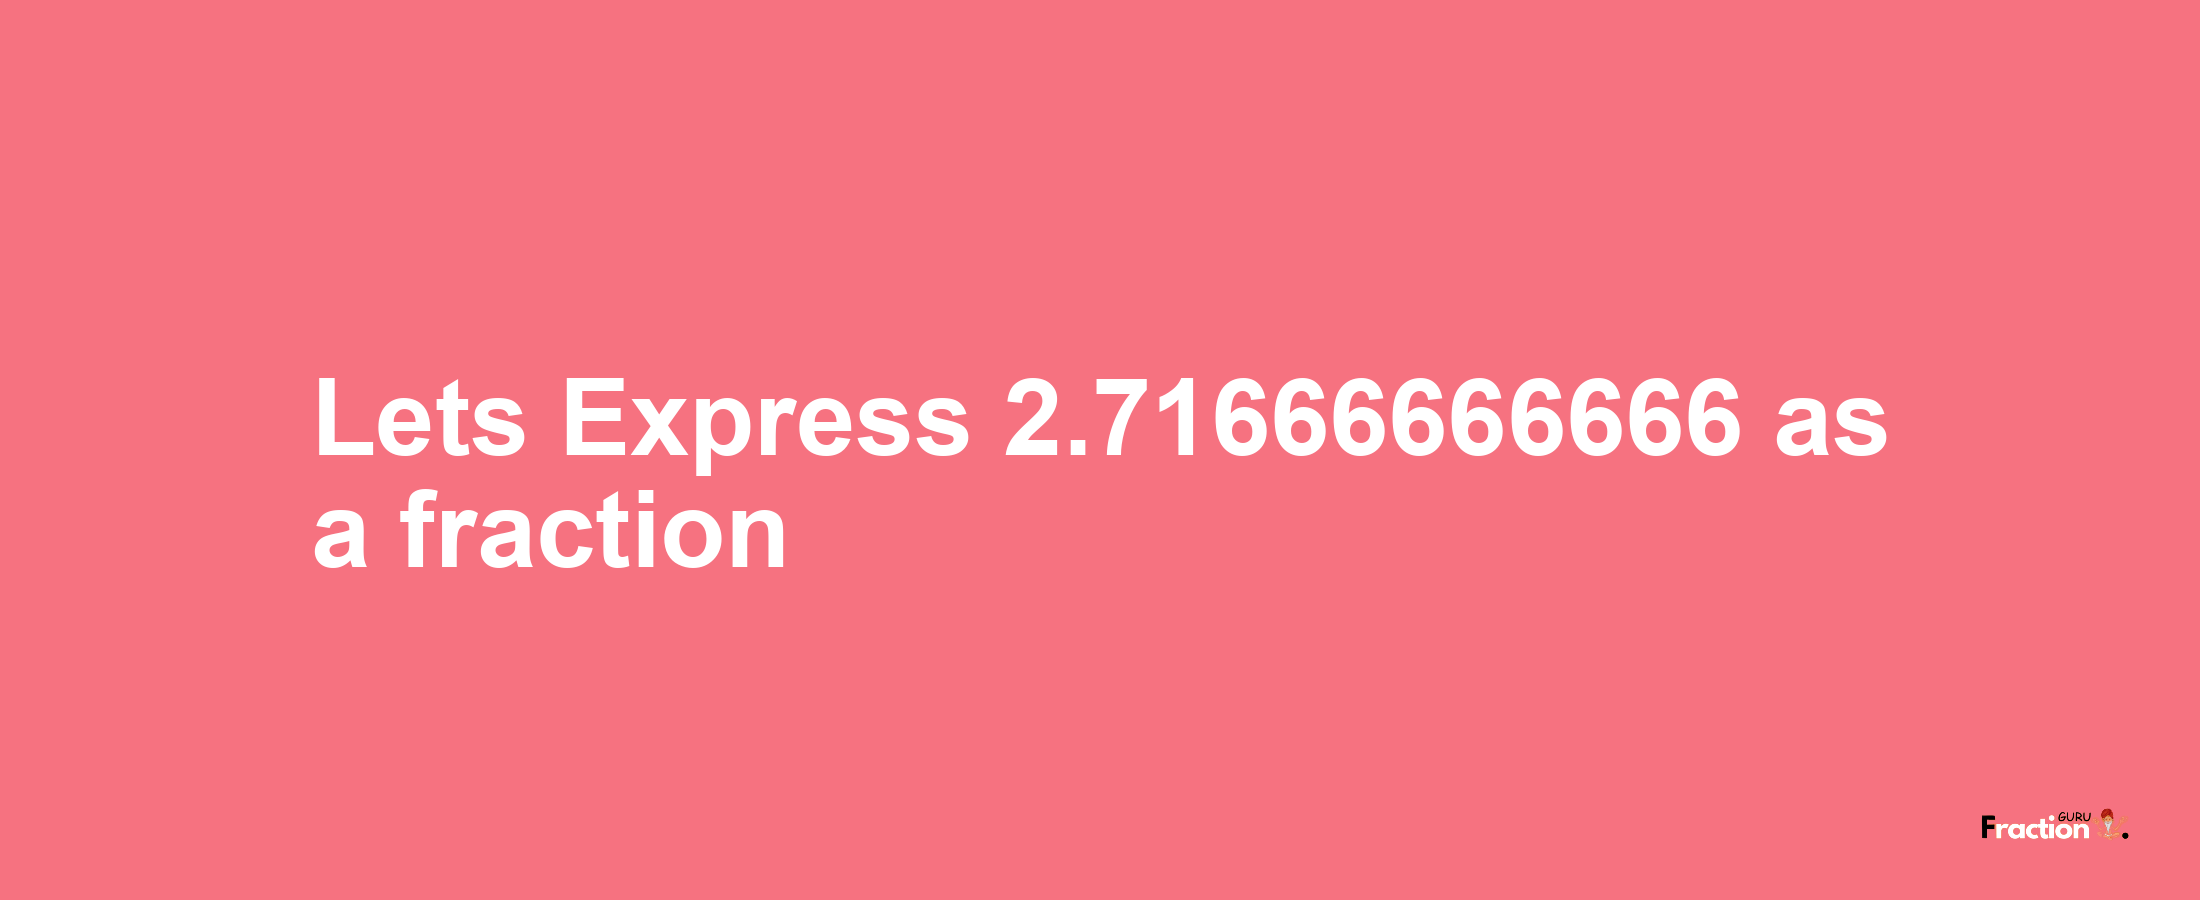 Lets Express 2.71666666666 as afraction